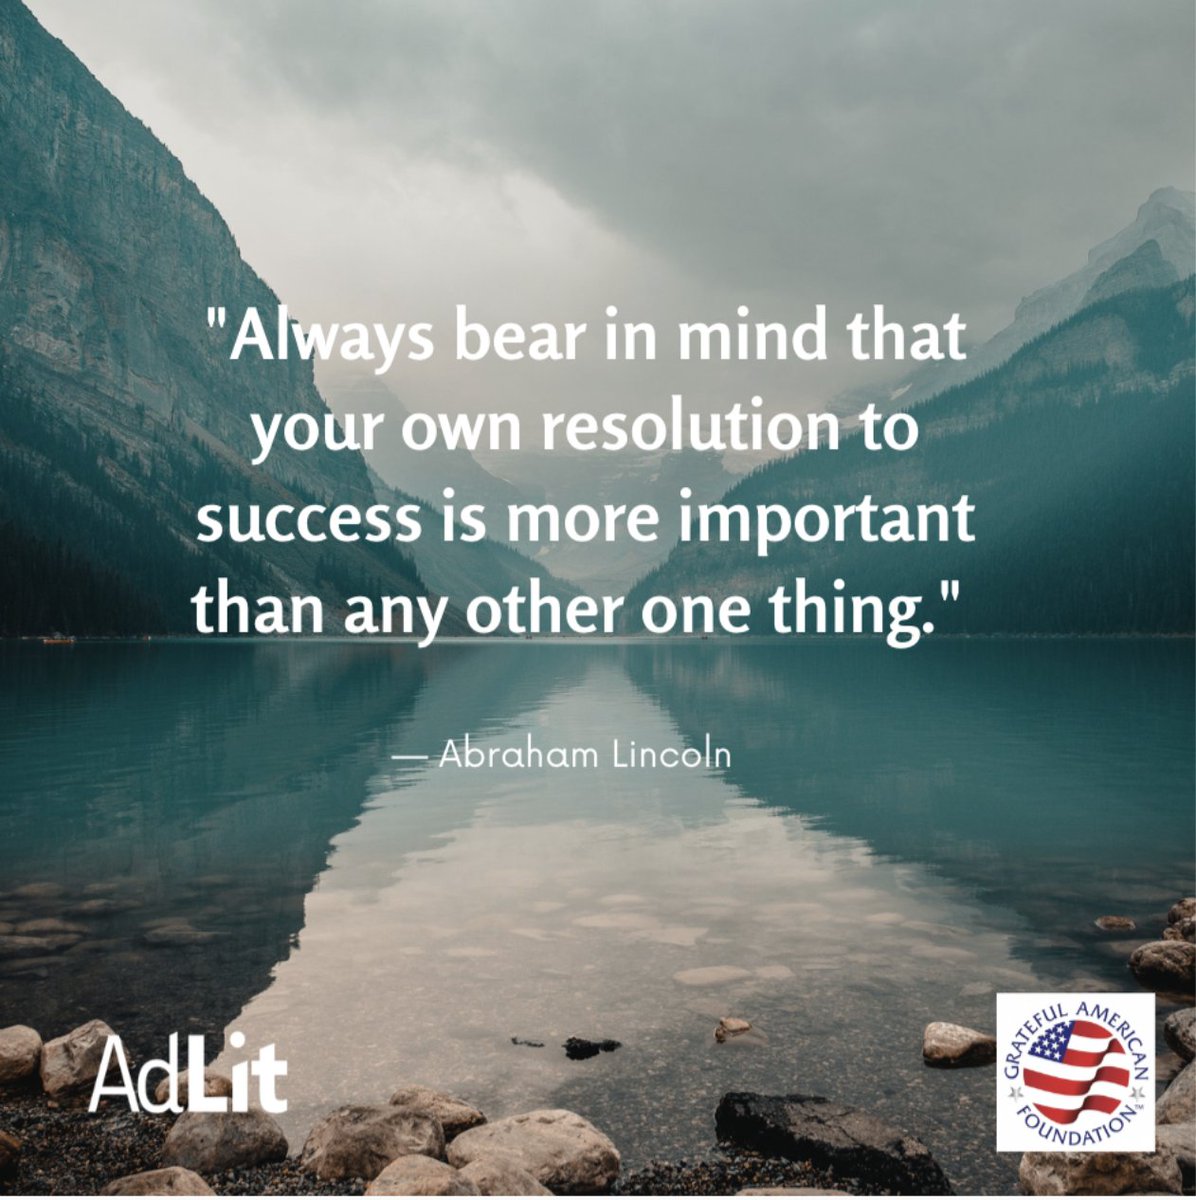 Learn more about using historical quotes and other creative ways to engage students in learning about about history and civics. adlit.org/in-the-classro… #teachinghistory #socialstudies #teachingtips #teachingtools